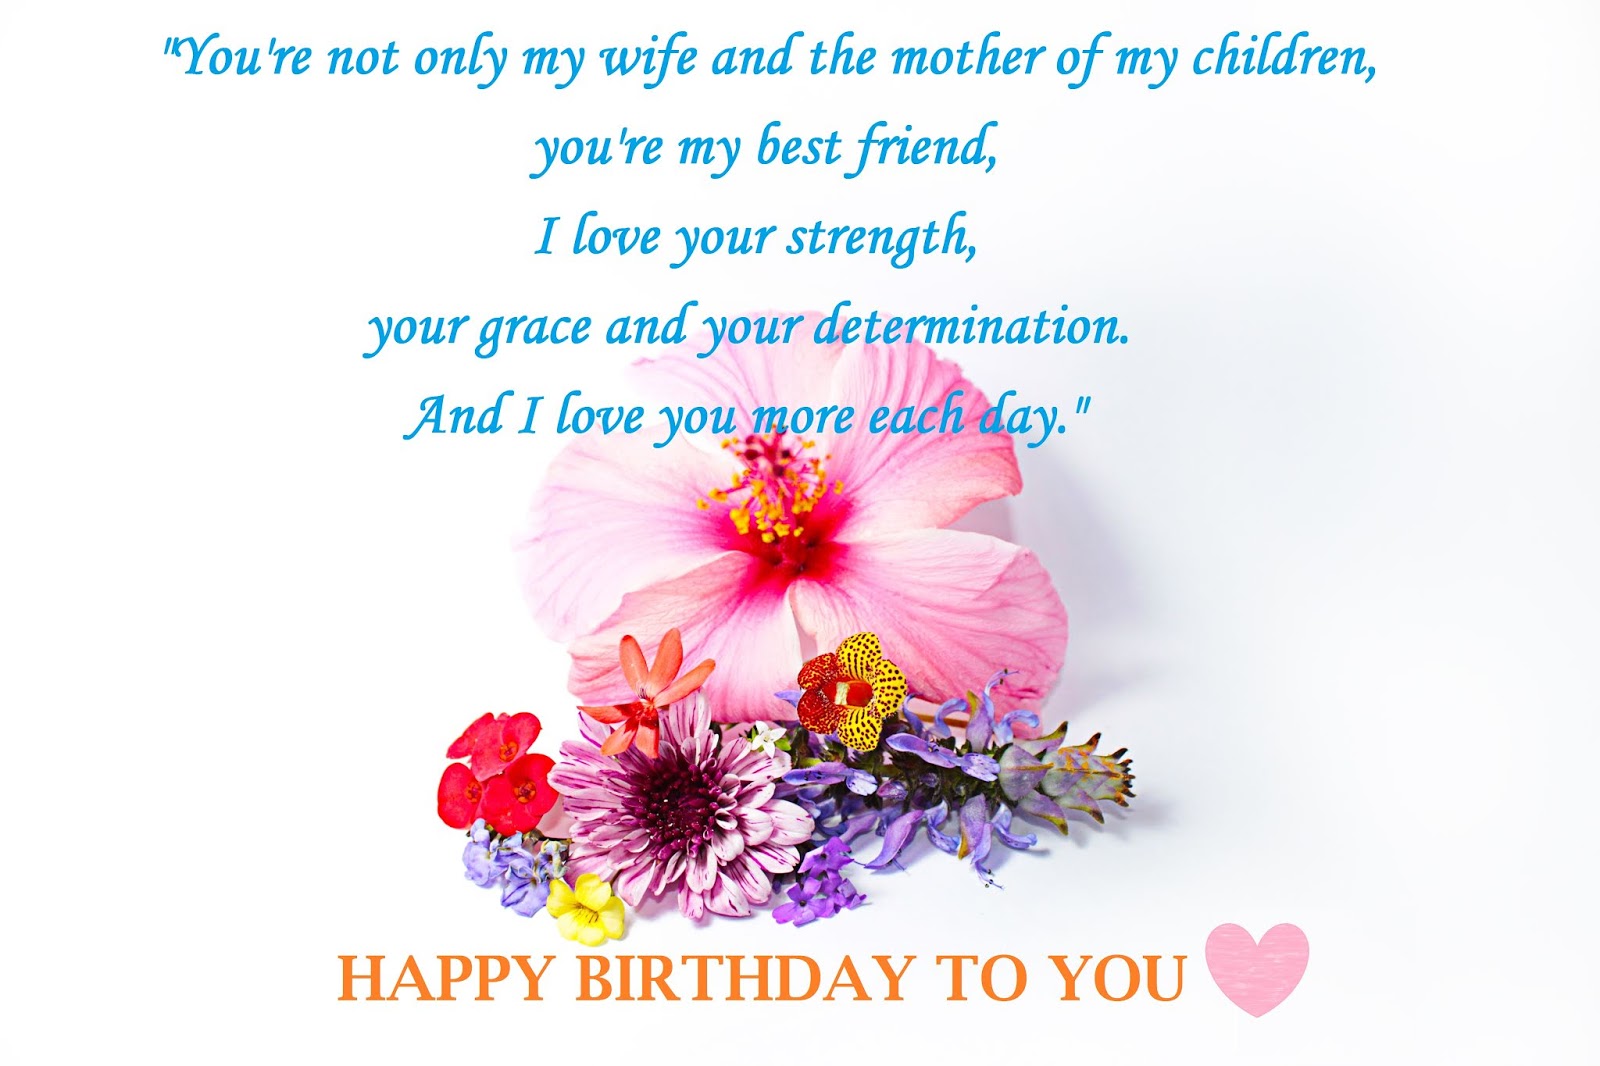 Happy Birthday Wishes for Wife - My Emotions